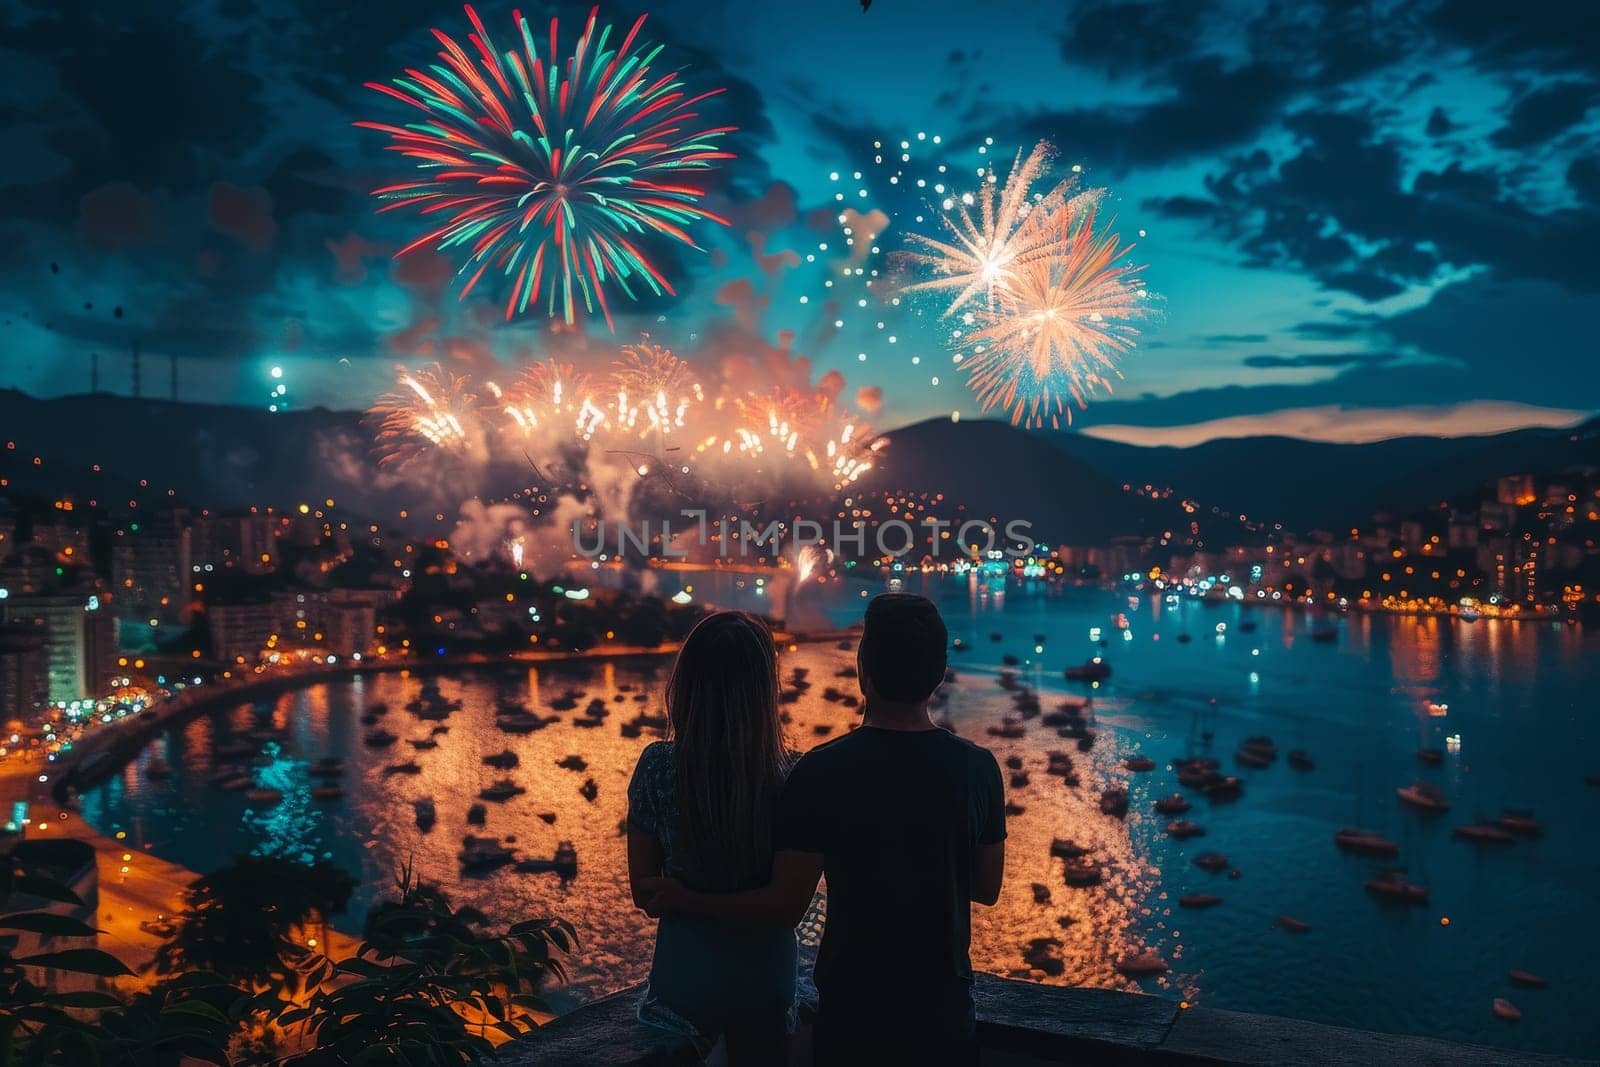 A couple is watching fireworks over a body of water. The fireworks are bright and colorful, creating a festive atmosphere. The couple is enjoying the moment together